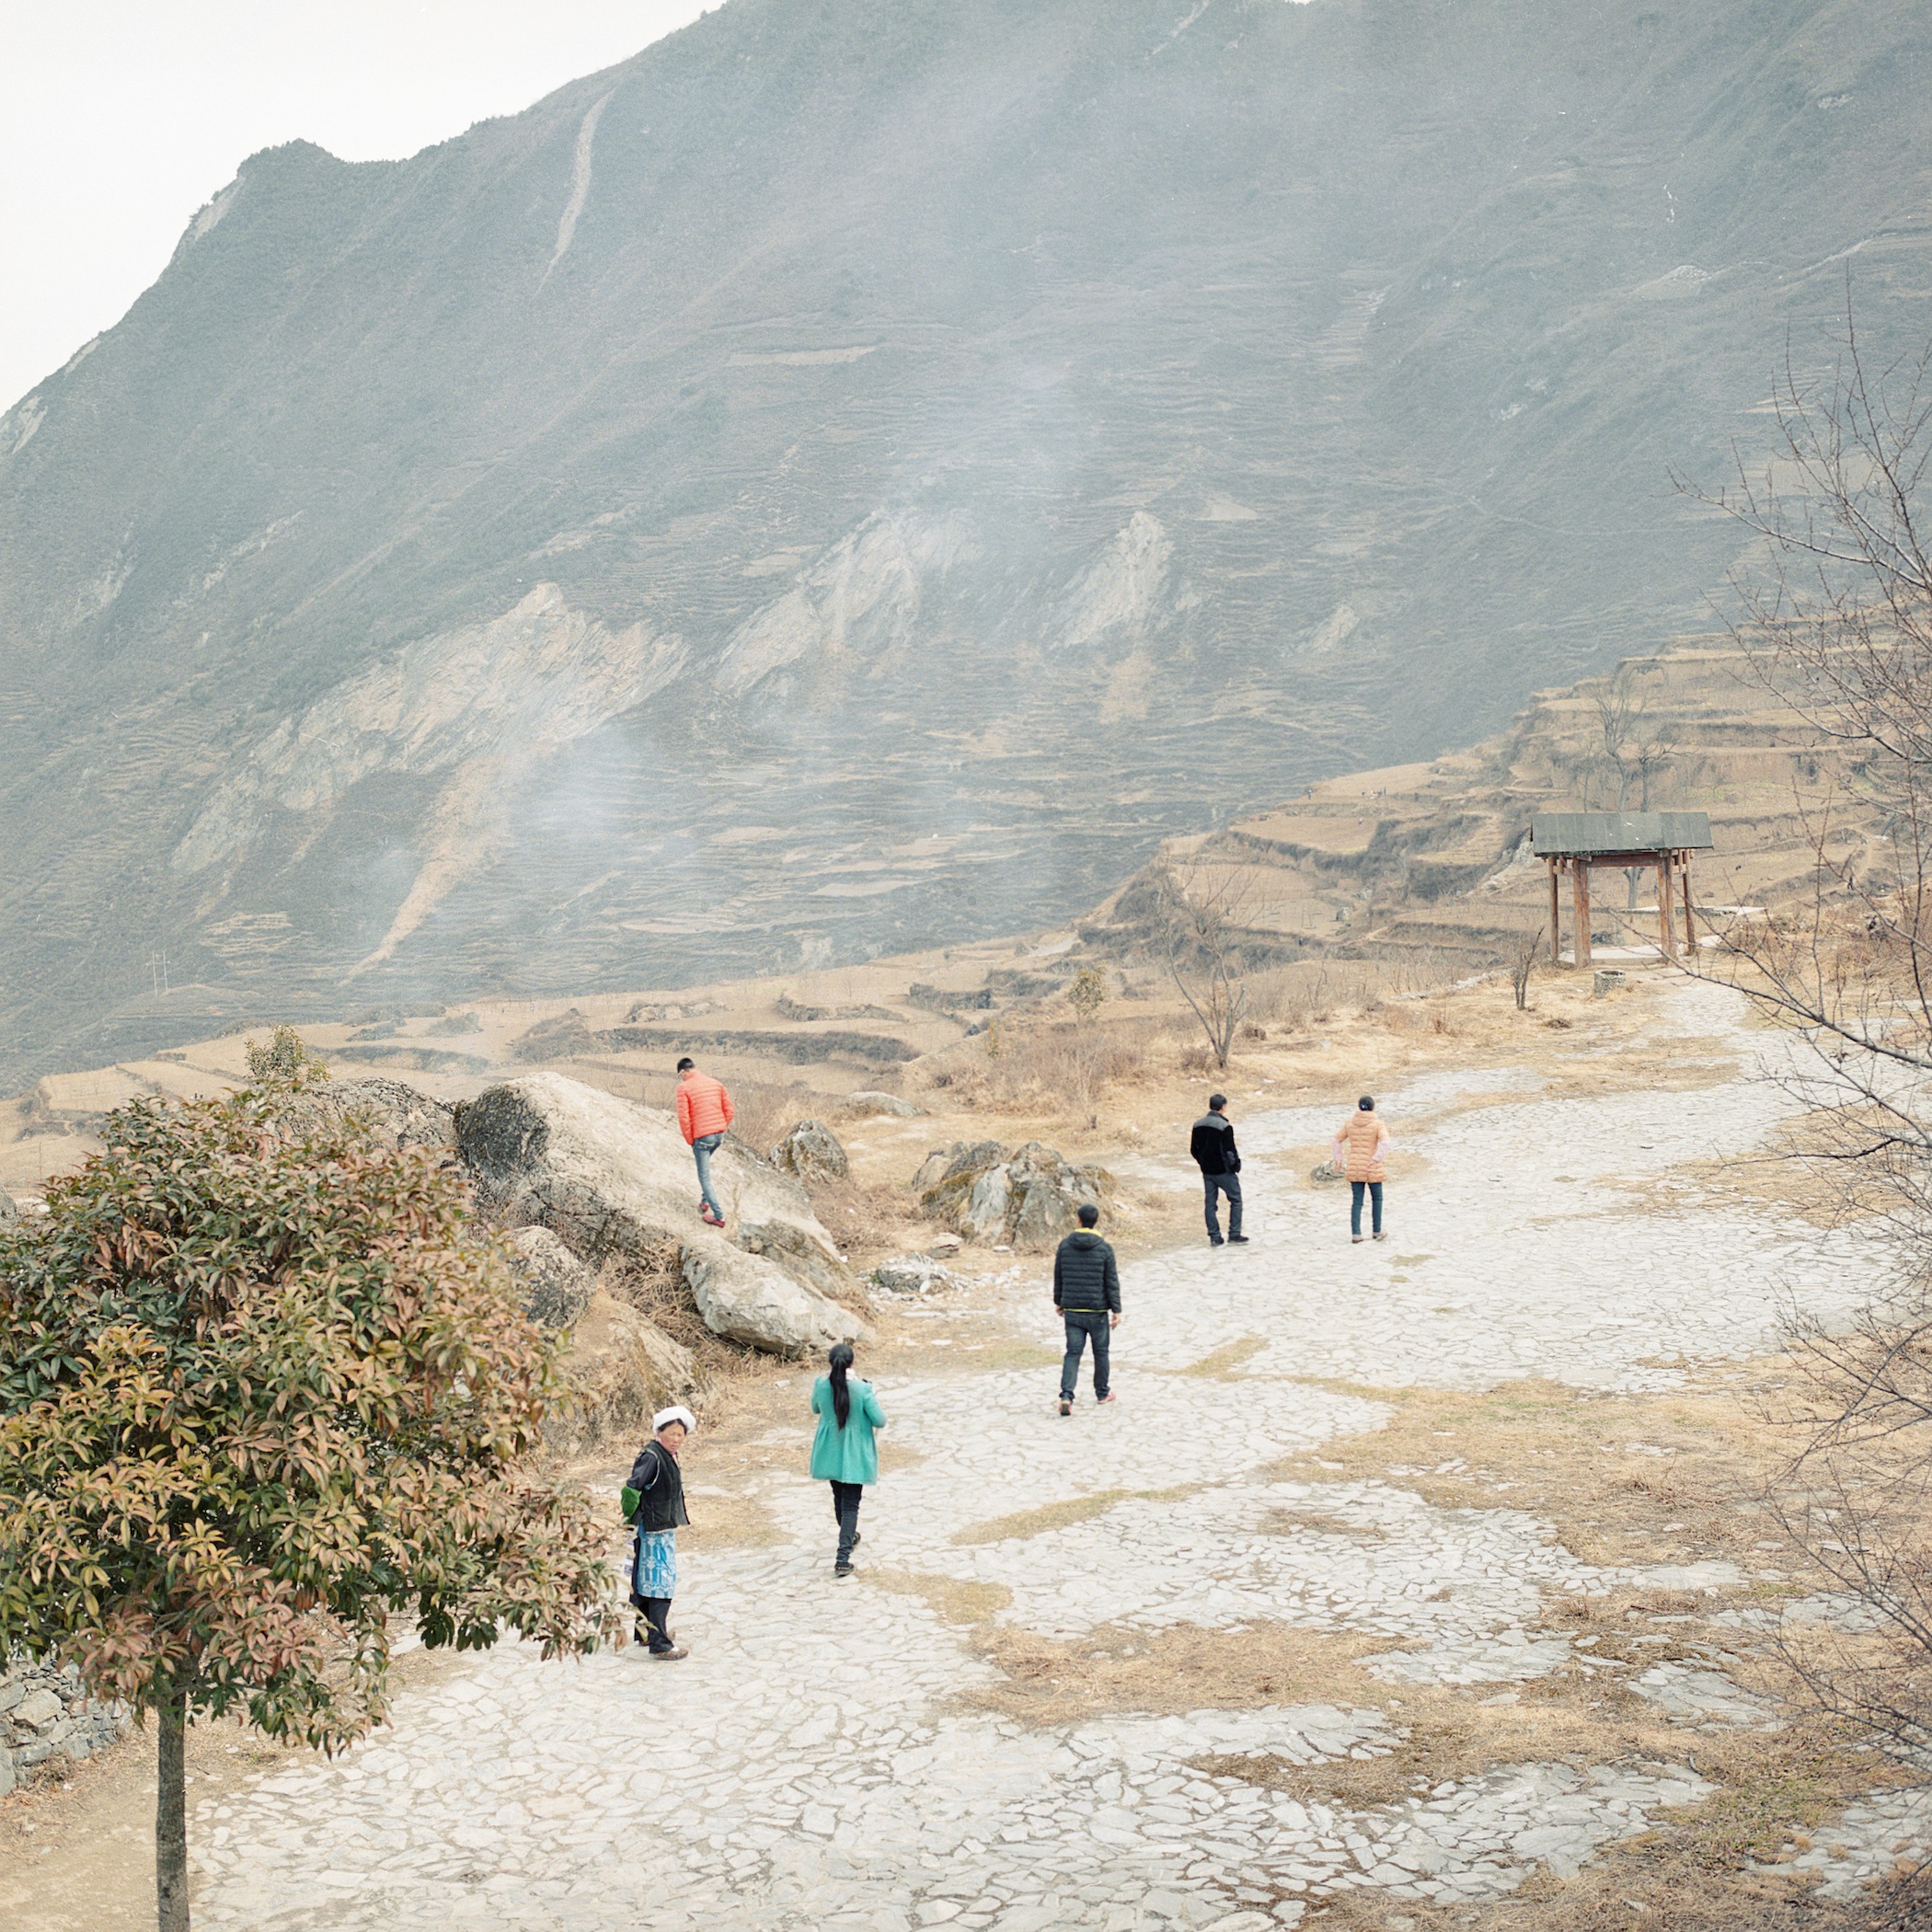 View from the Daoist Temple Site, Radish Village, Sichuan, China, February 2016